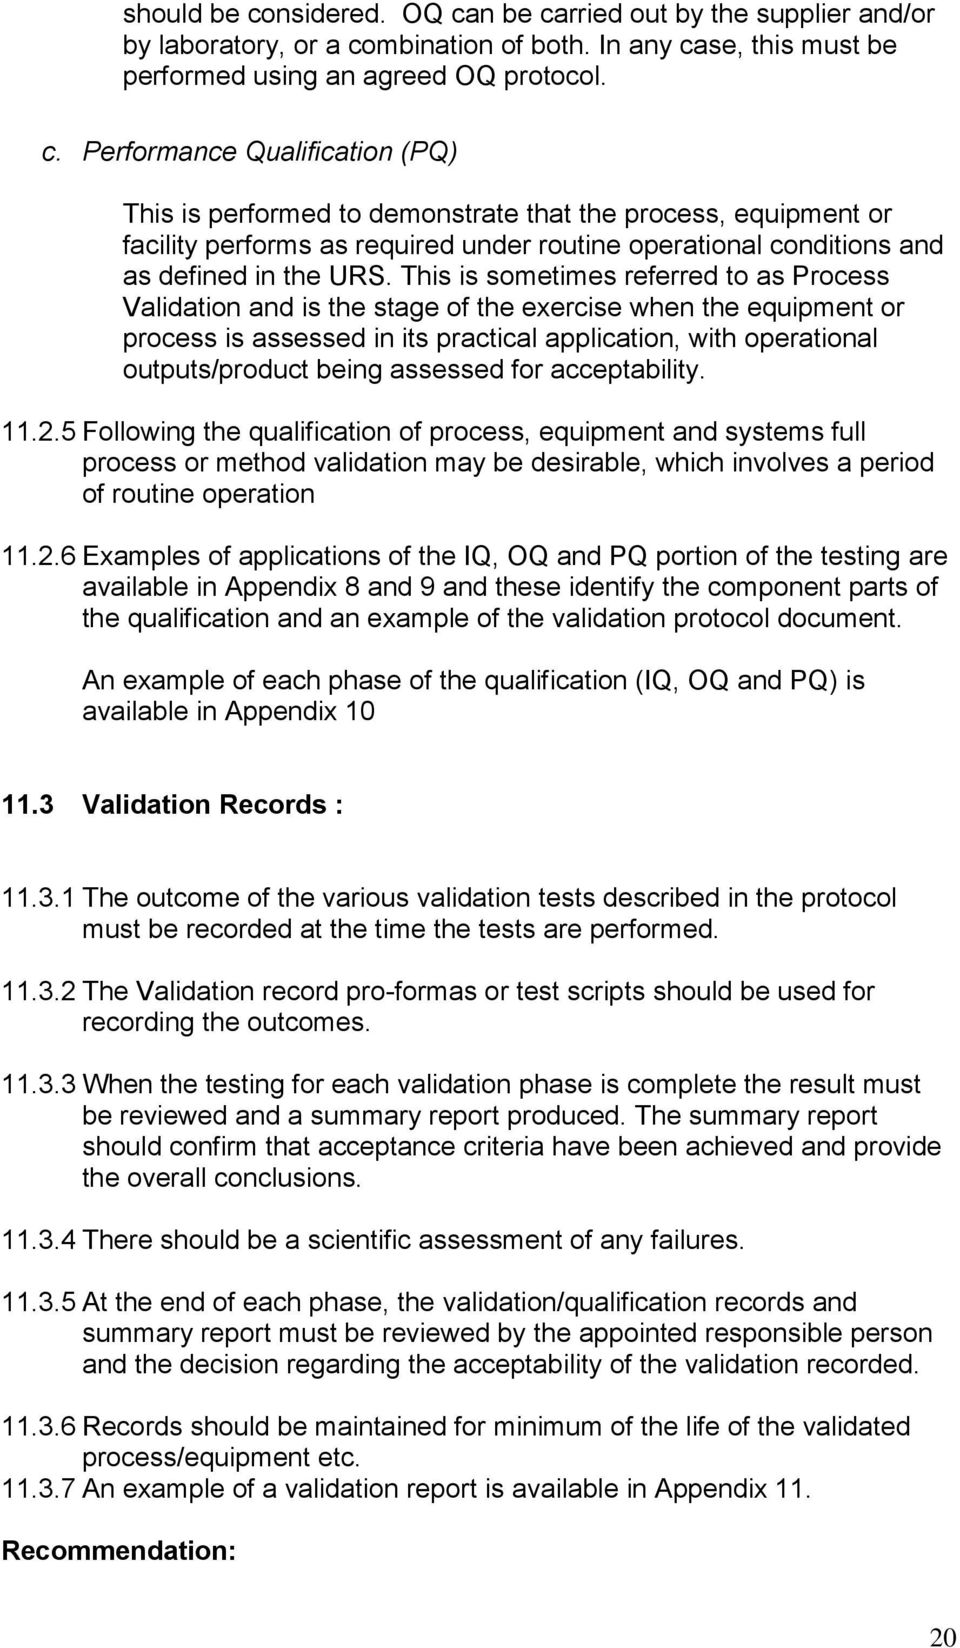 n be carried out by the supplier and/or by laboratory, or a combination of both. In any case, this must be performed using an agreed OQ protocol. c. Performance Qualification (PQ) This is performed to demonstrate that the process, equipment or facility performs as required under routine operational conditions and as defined in the URS.